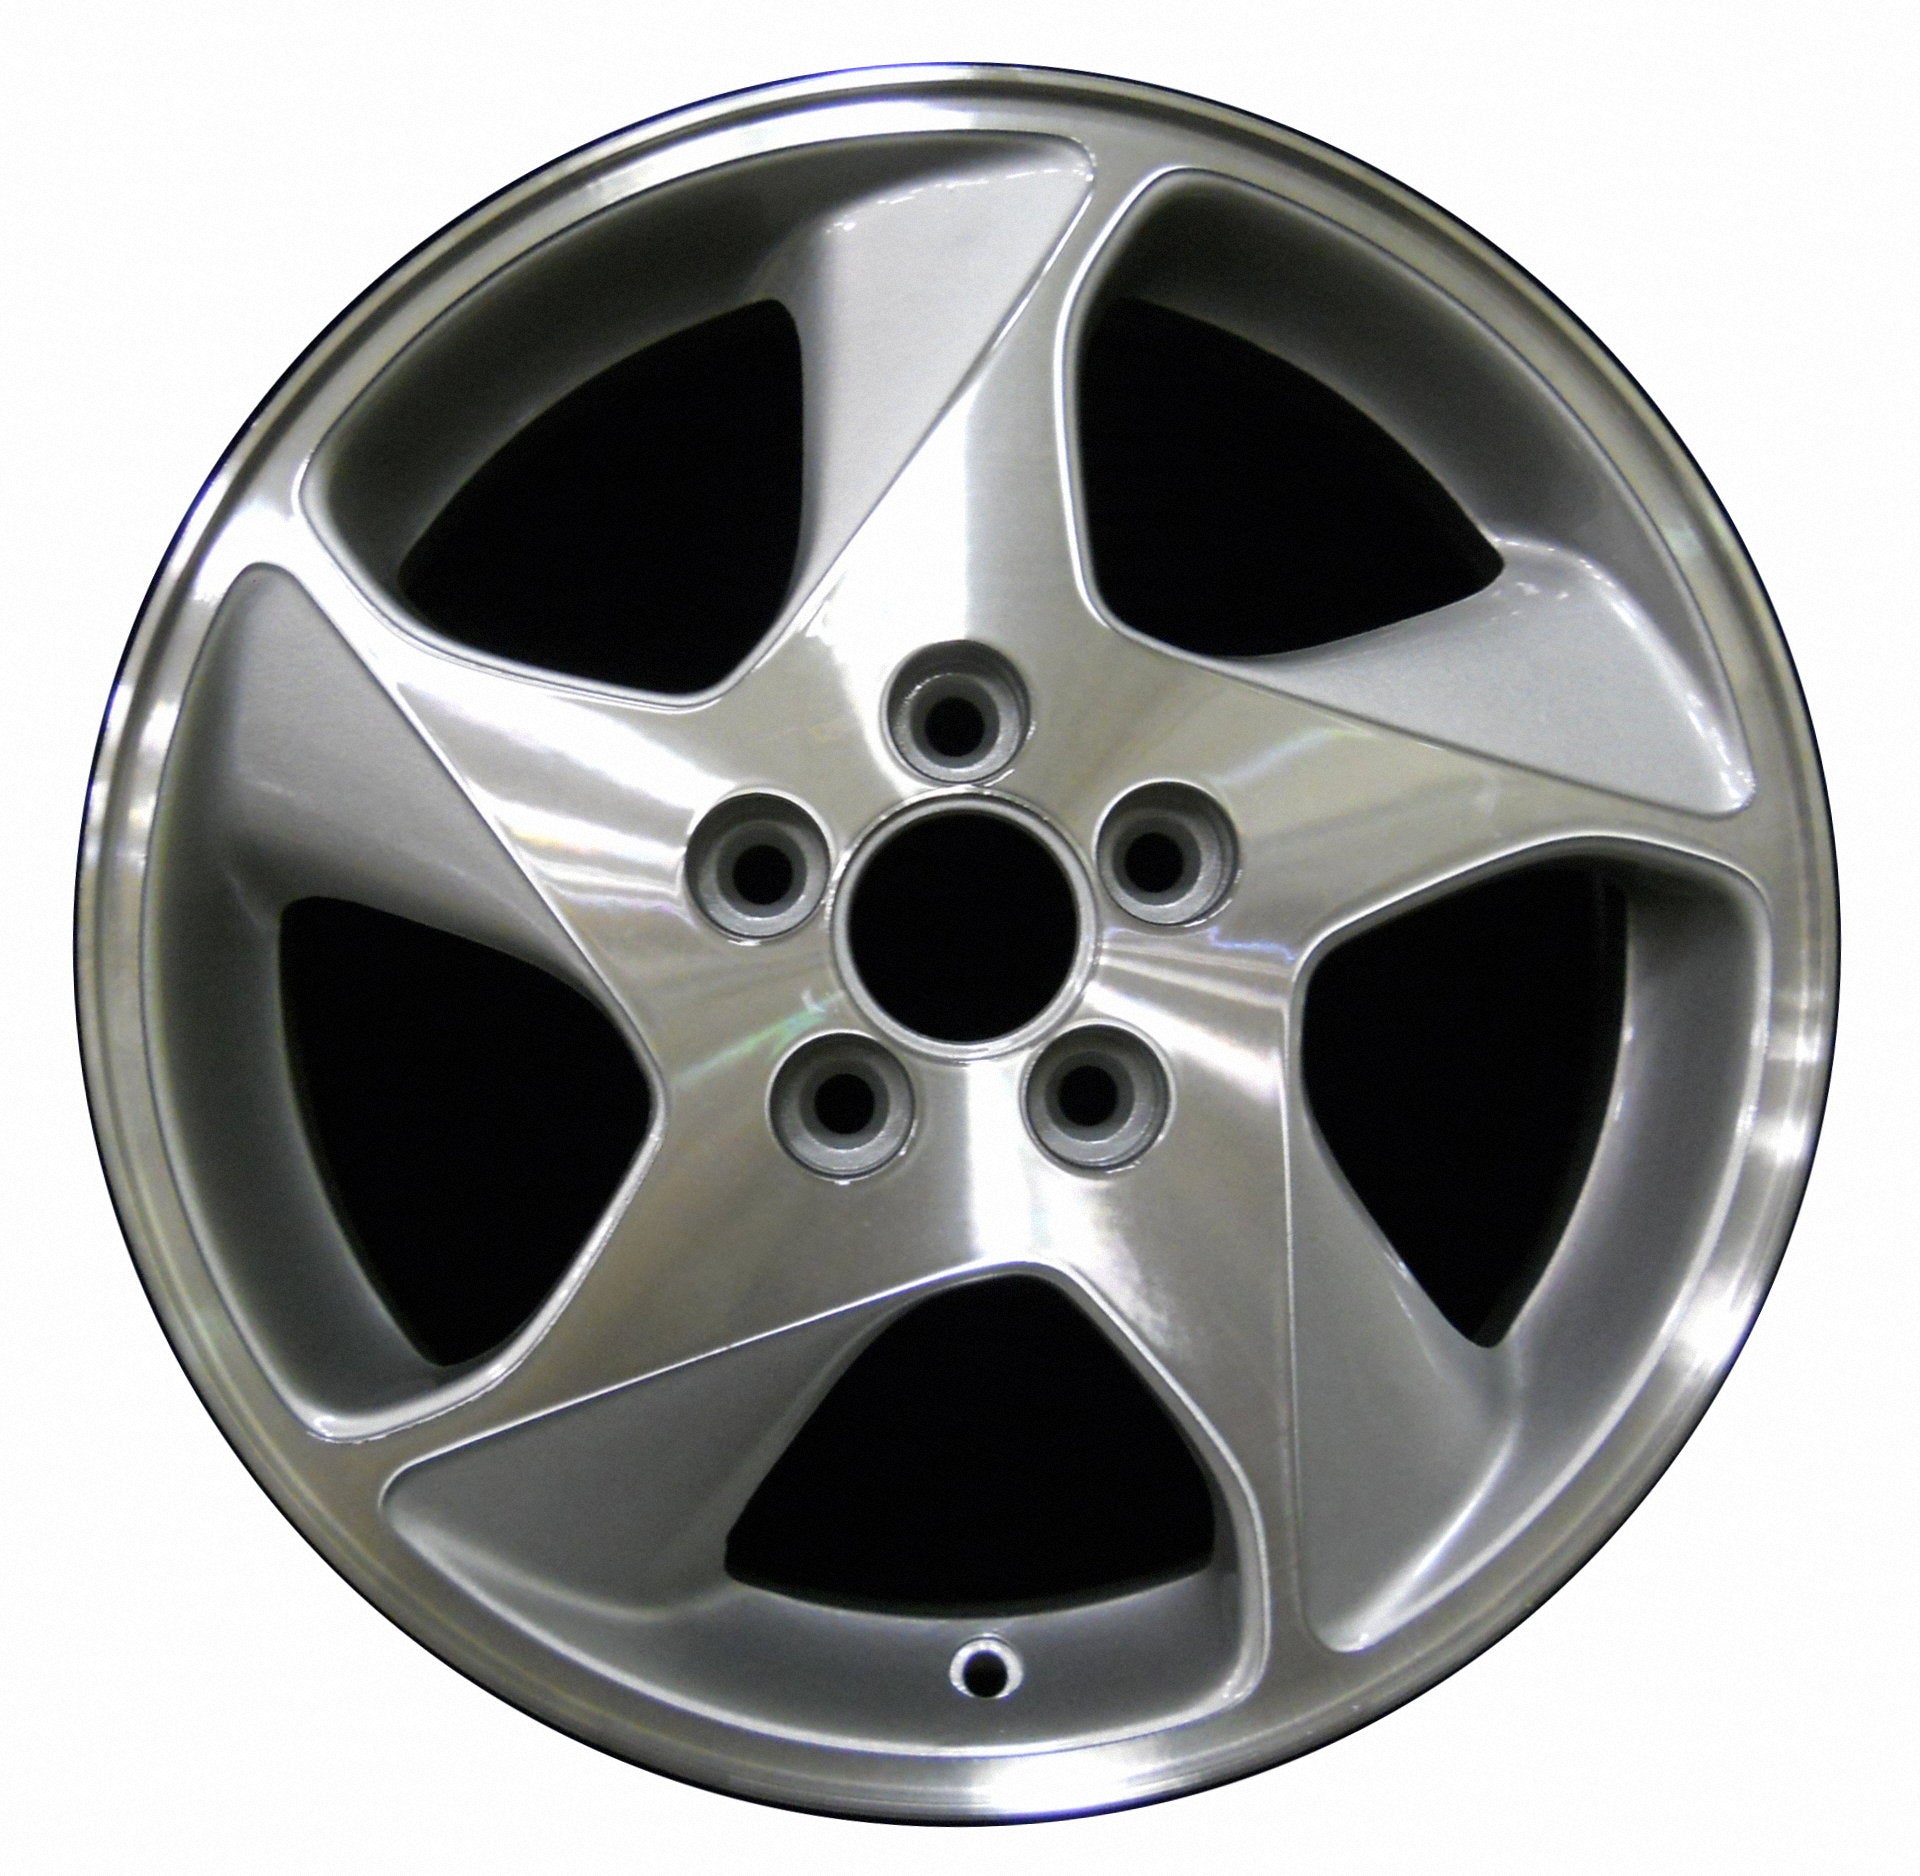 Ford Taurus  2003, 2004, 2005, 2006, 2007 Factory OEM Car Wheel Size 16x6 Alloy WAO.3505.PS02.MA